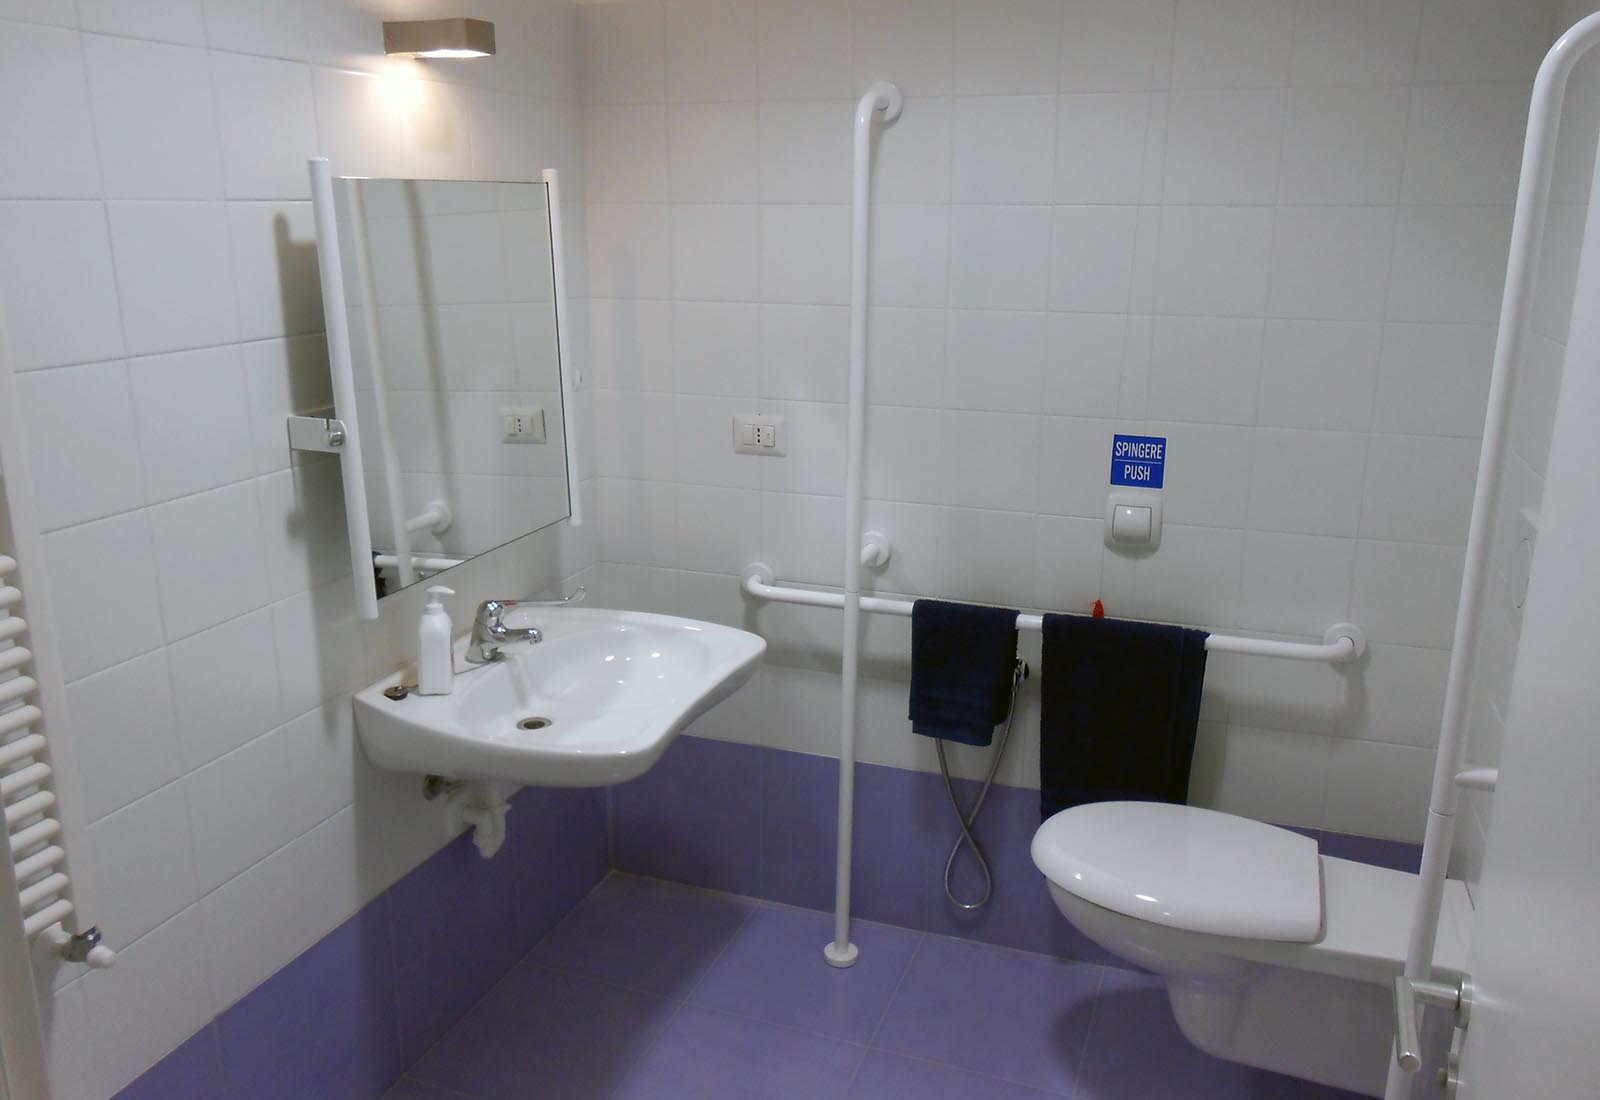 Psychotherapy and medical study in Rho - The disabled bathroom